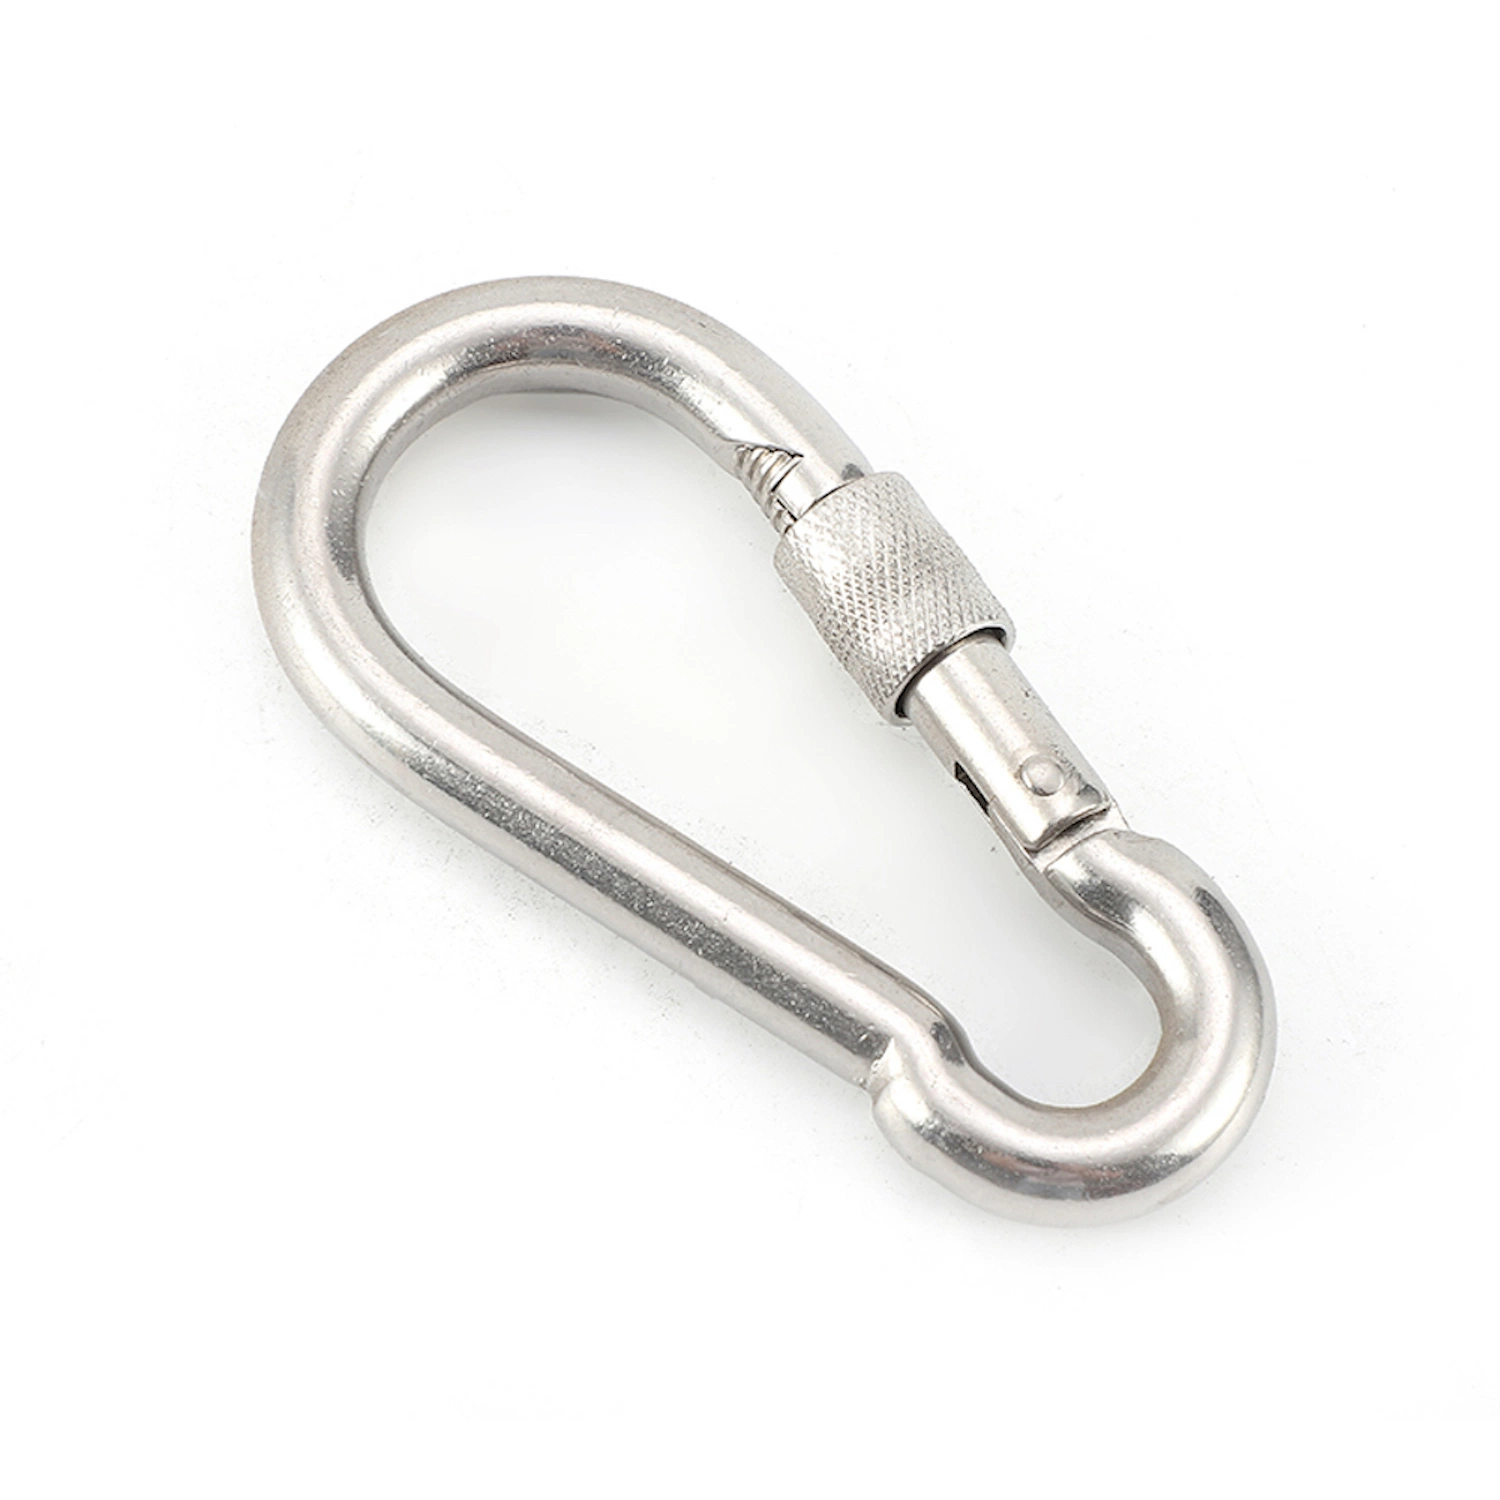 Rigging Hardware Stainless Steel Wire Rope Accessories Snap Hook